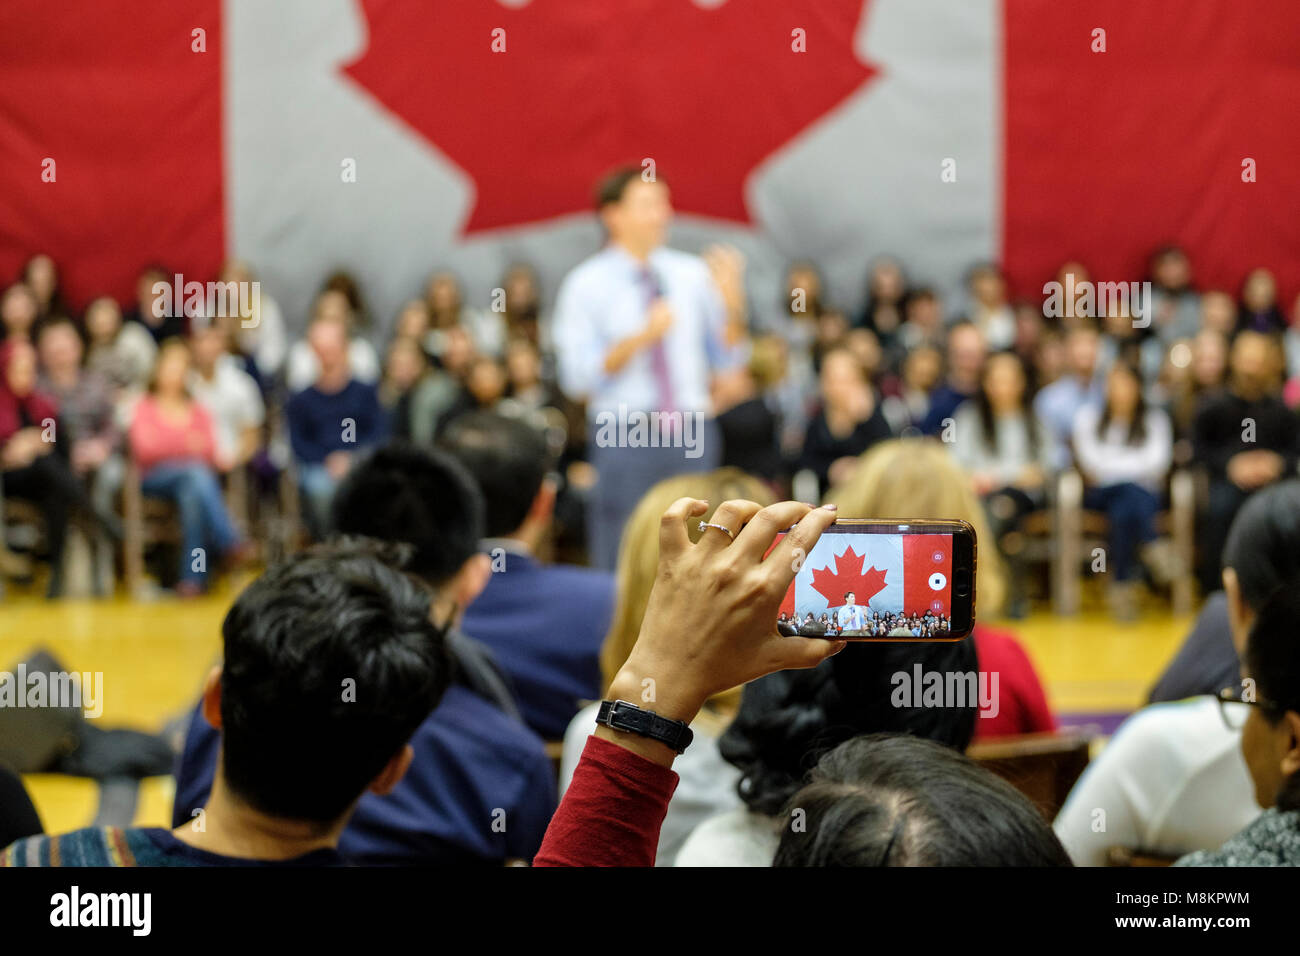 Hand of a woman holding a cell phone taking a picture of Justin Trudeau, Prime Minister of Canada, at a town hall meeting in London, Ontario, Canada. Stock Photo